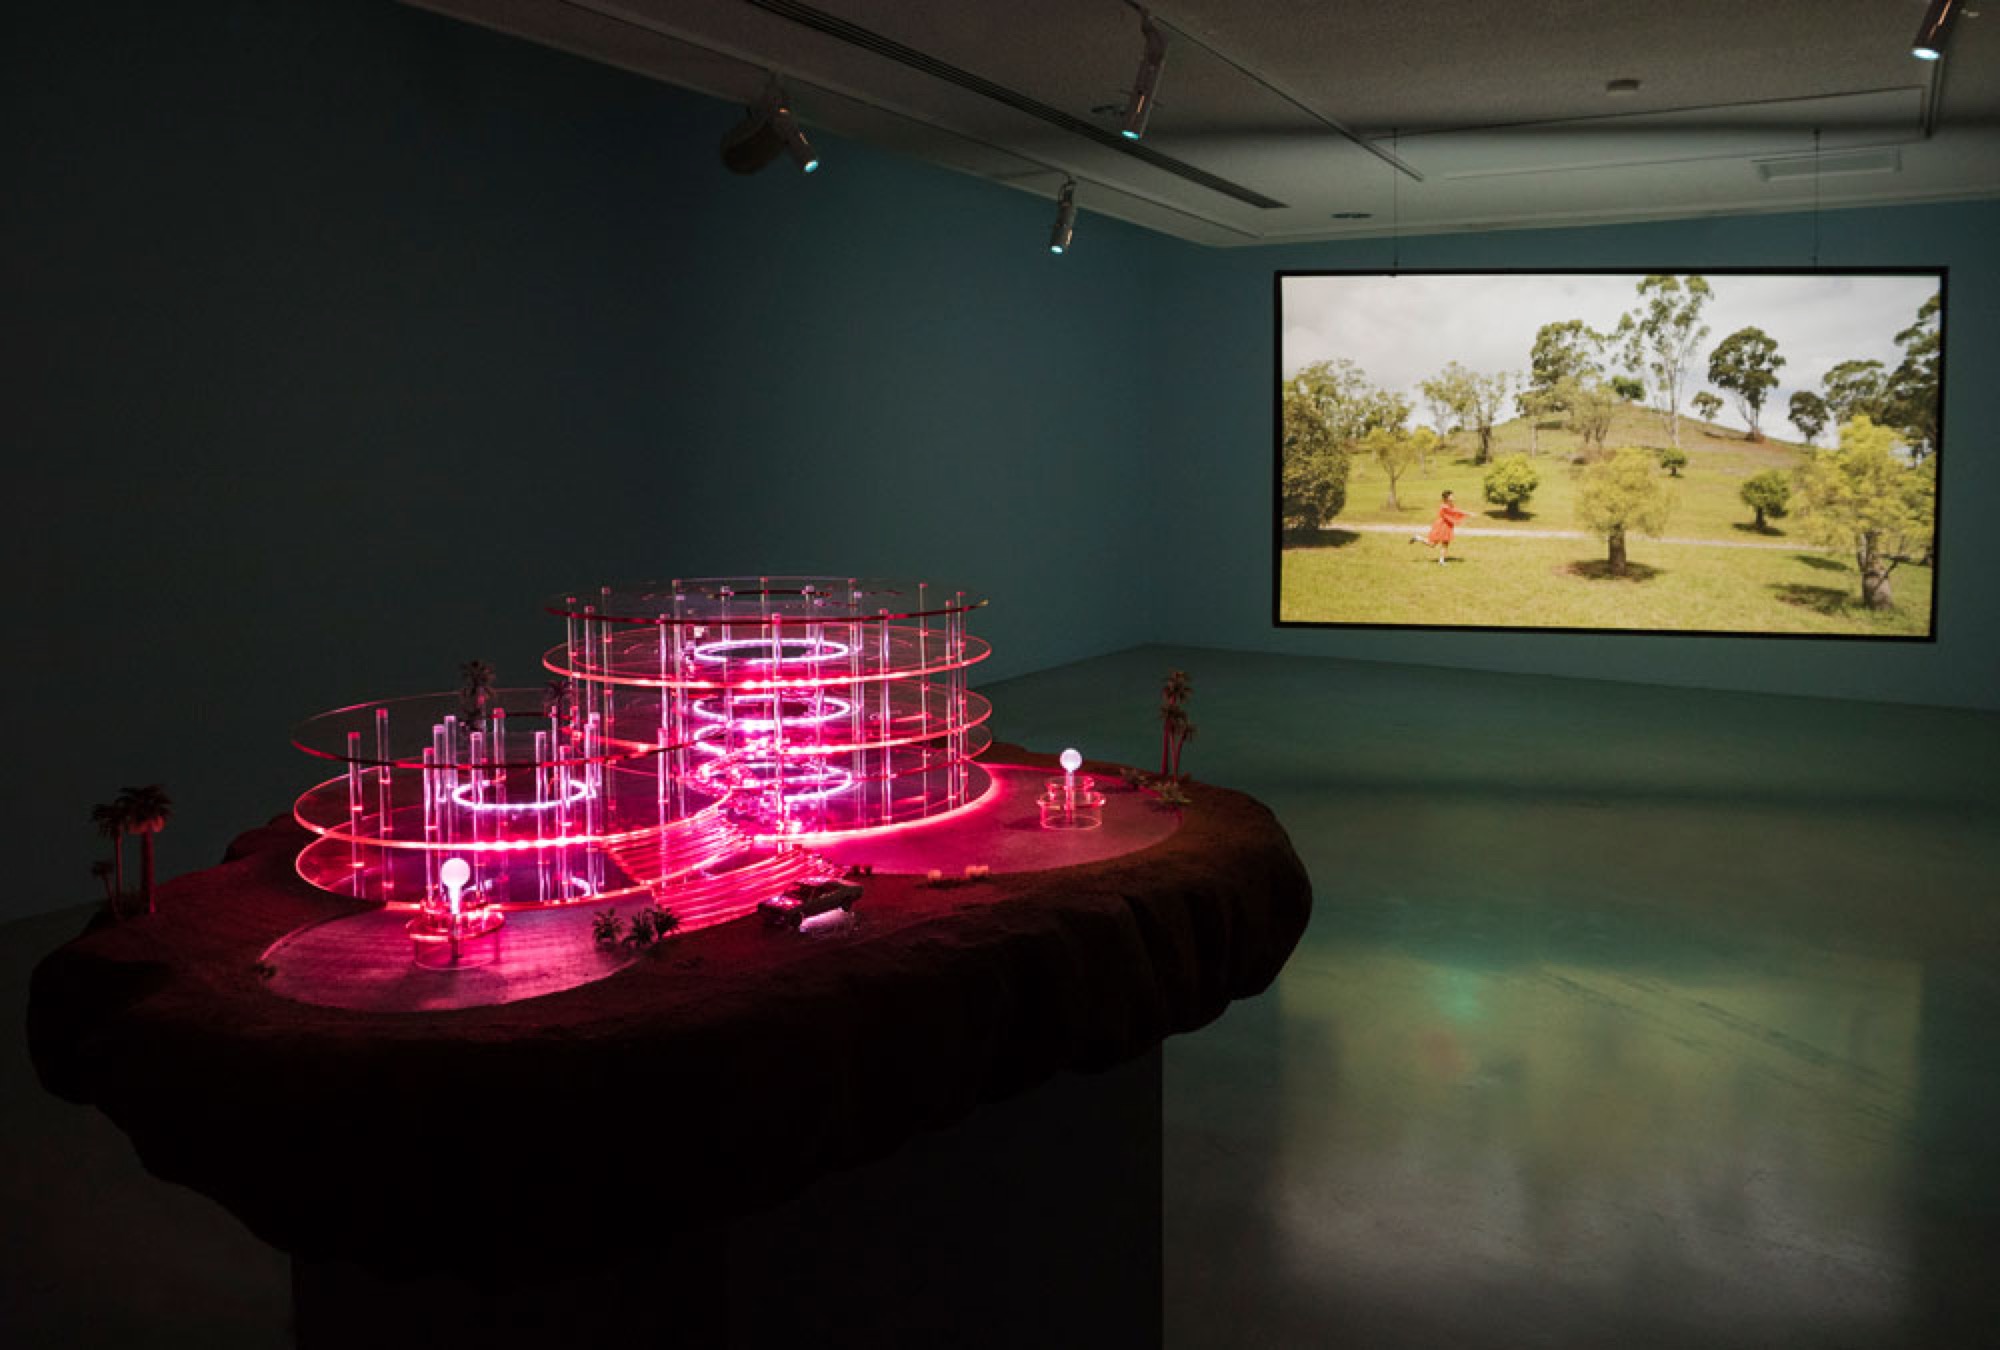 Sonia Leber &amp; David Chesworth, <em>Universal Power House</em>, 2017. Installation view of HD video and electric model. Model fabrication Matty Fuller. Courtesy the artists. Commissioned by Campbelltown Arts Centre, Sydney.